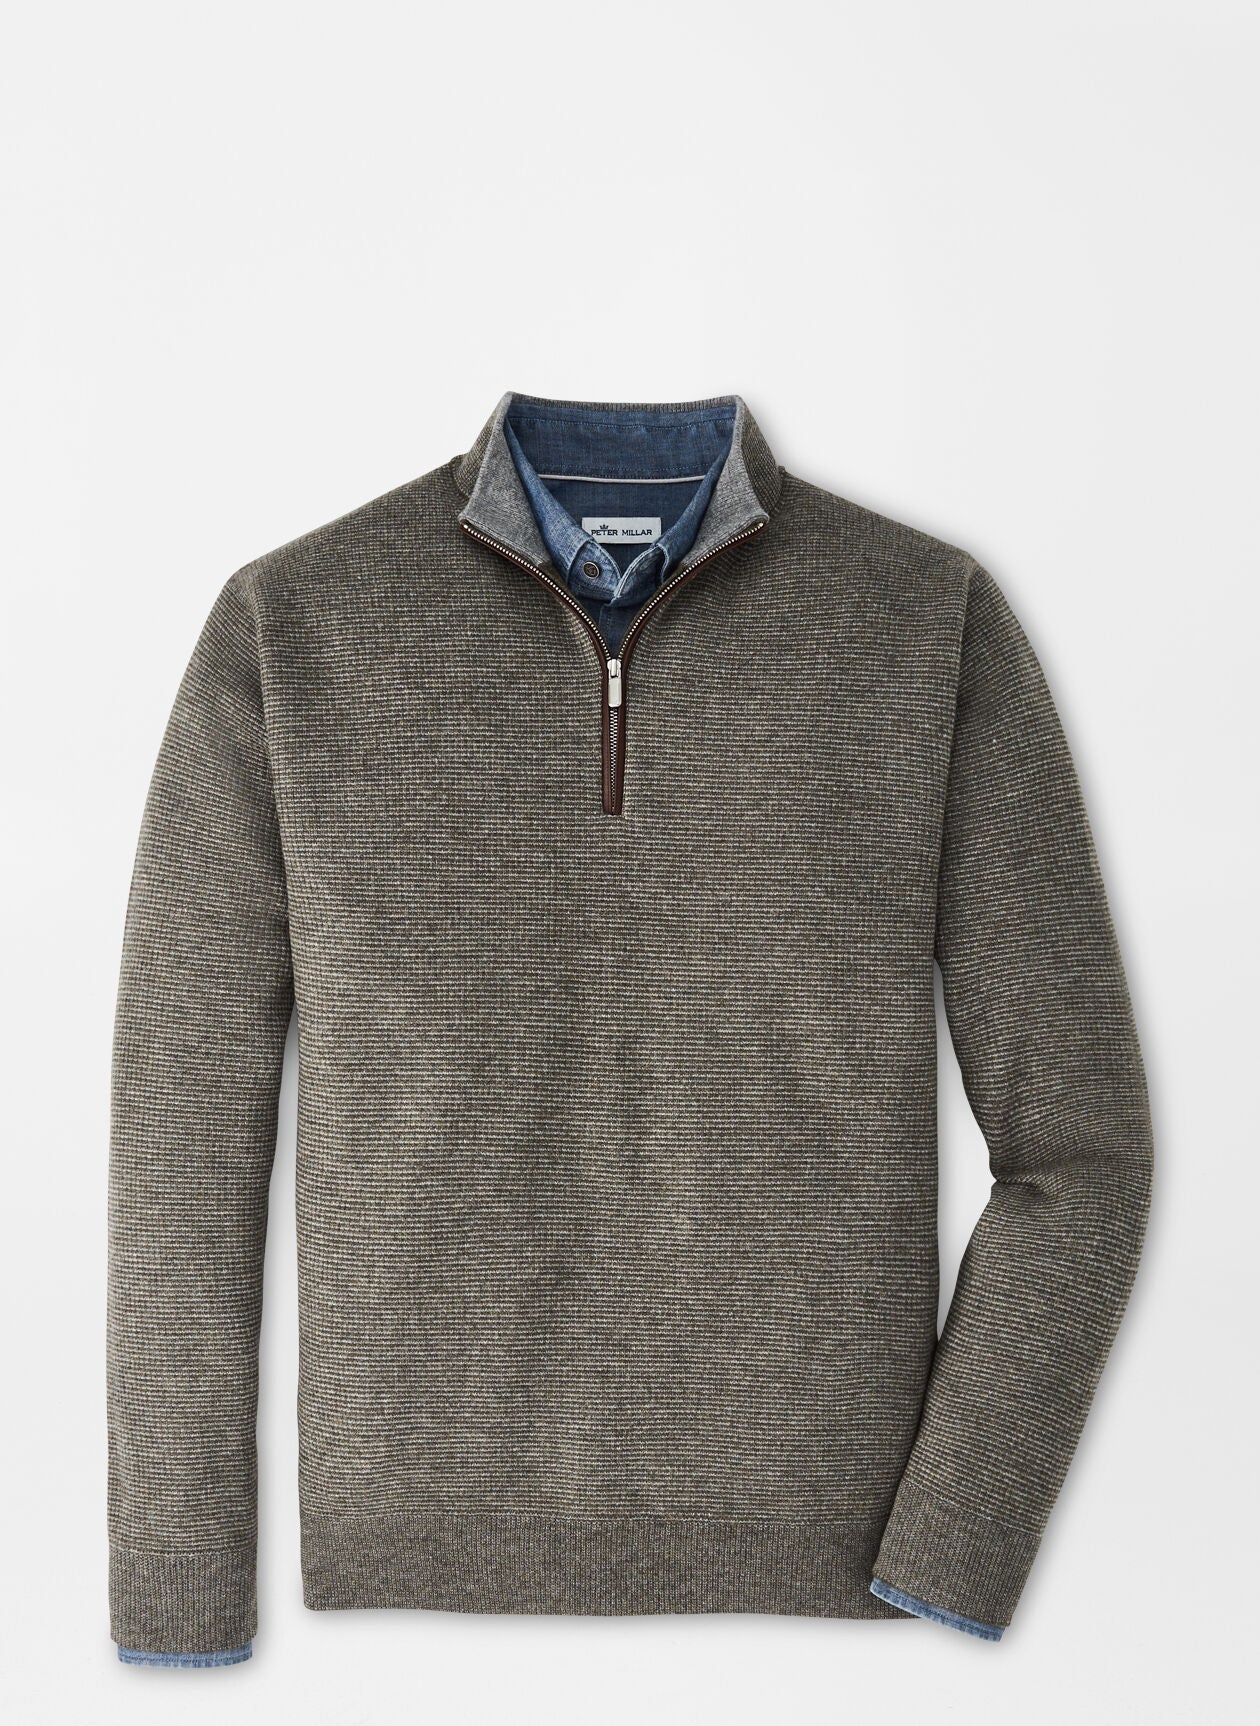 Mill Wool-Cashmere Quarter-Zip - OLIVE BRANCH